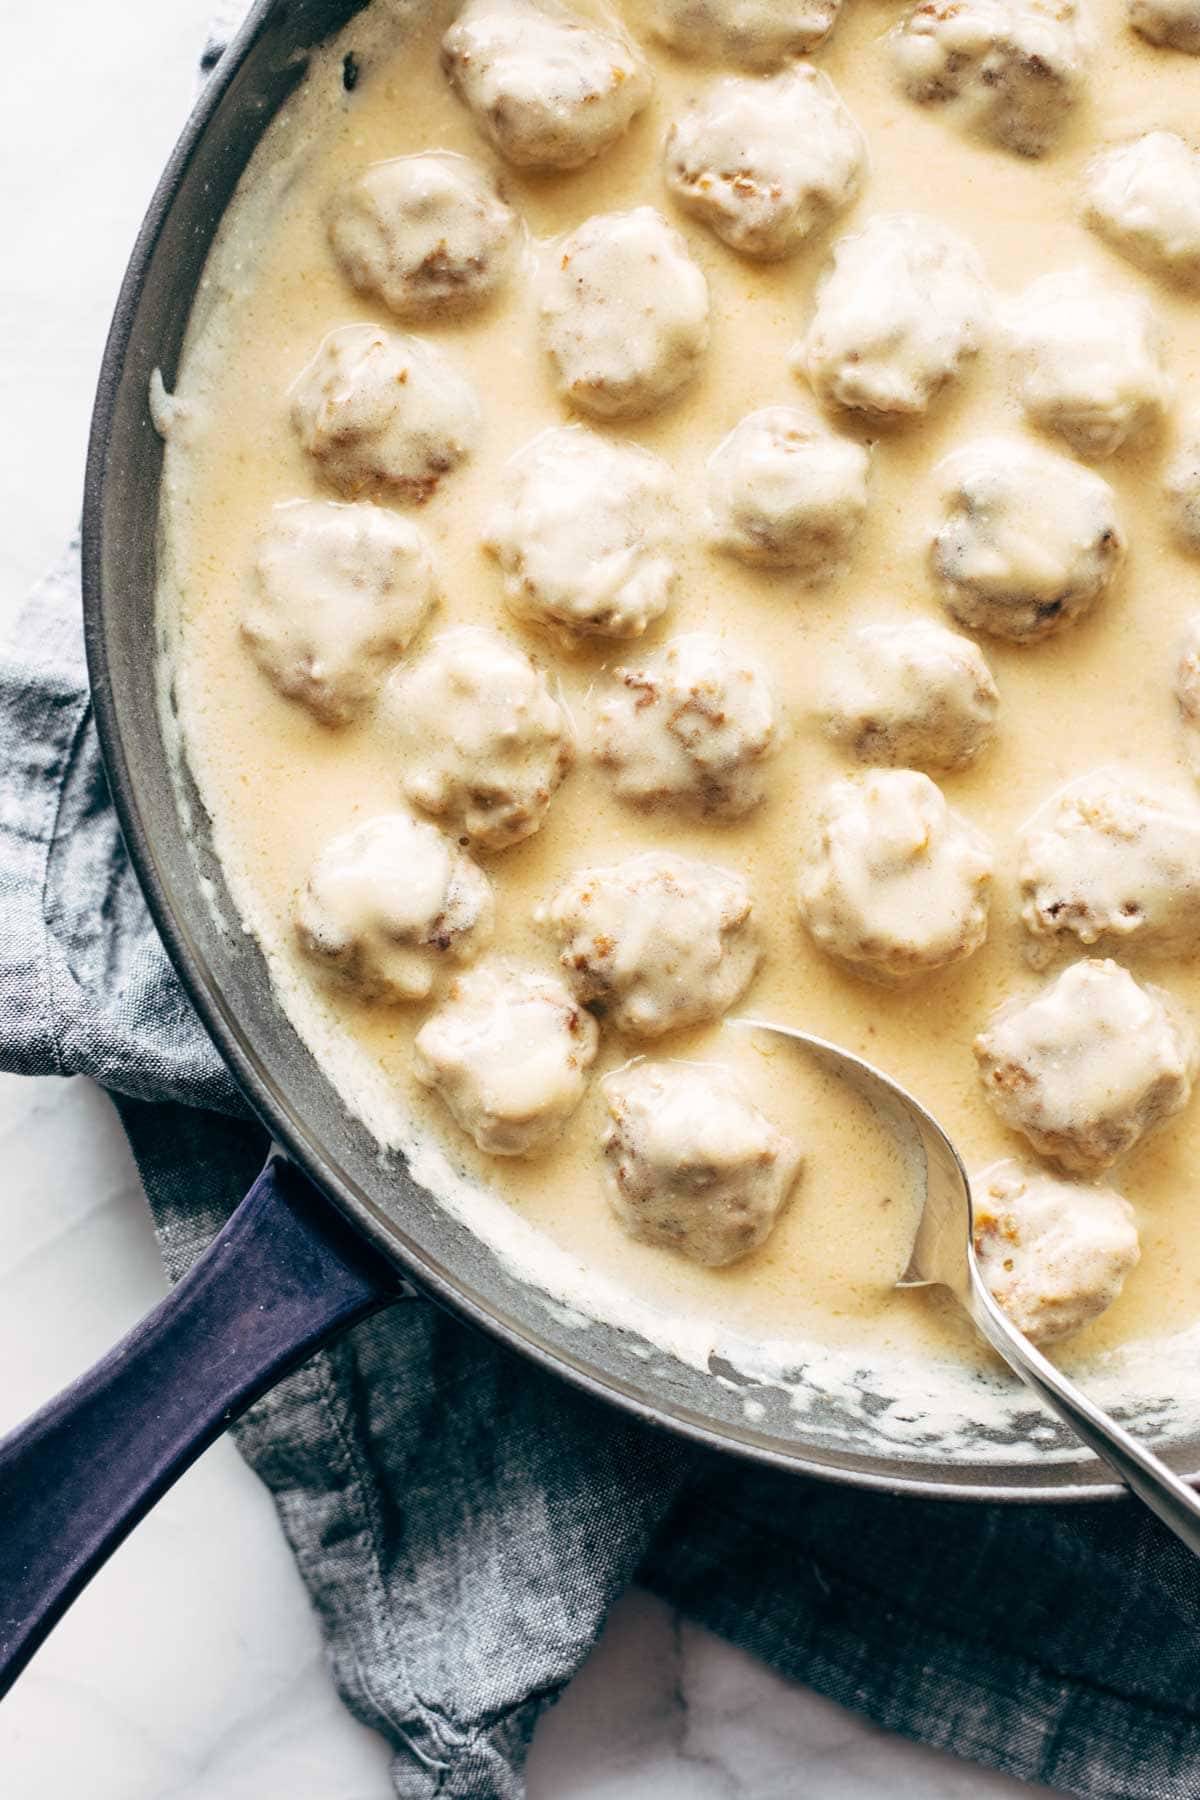 Swedish meatballs in a pan with gravy.